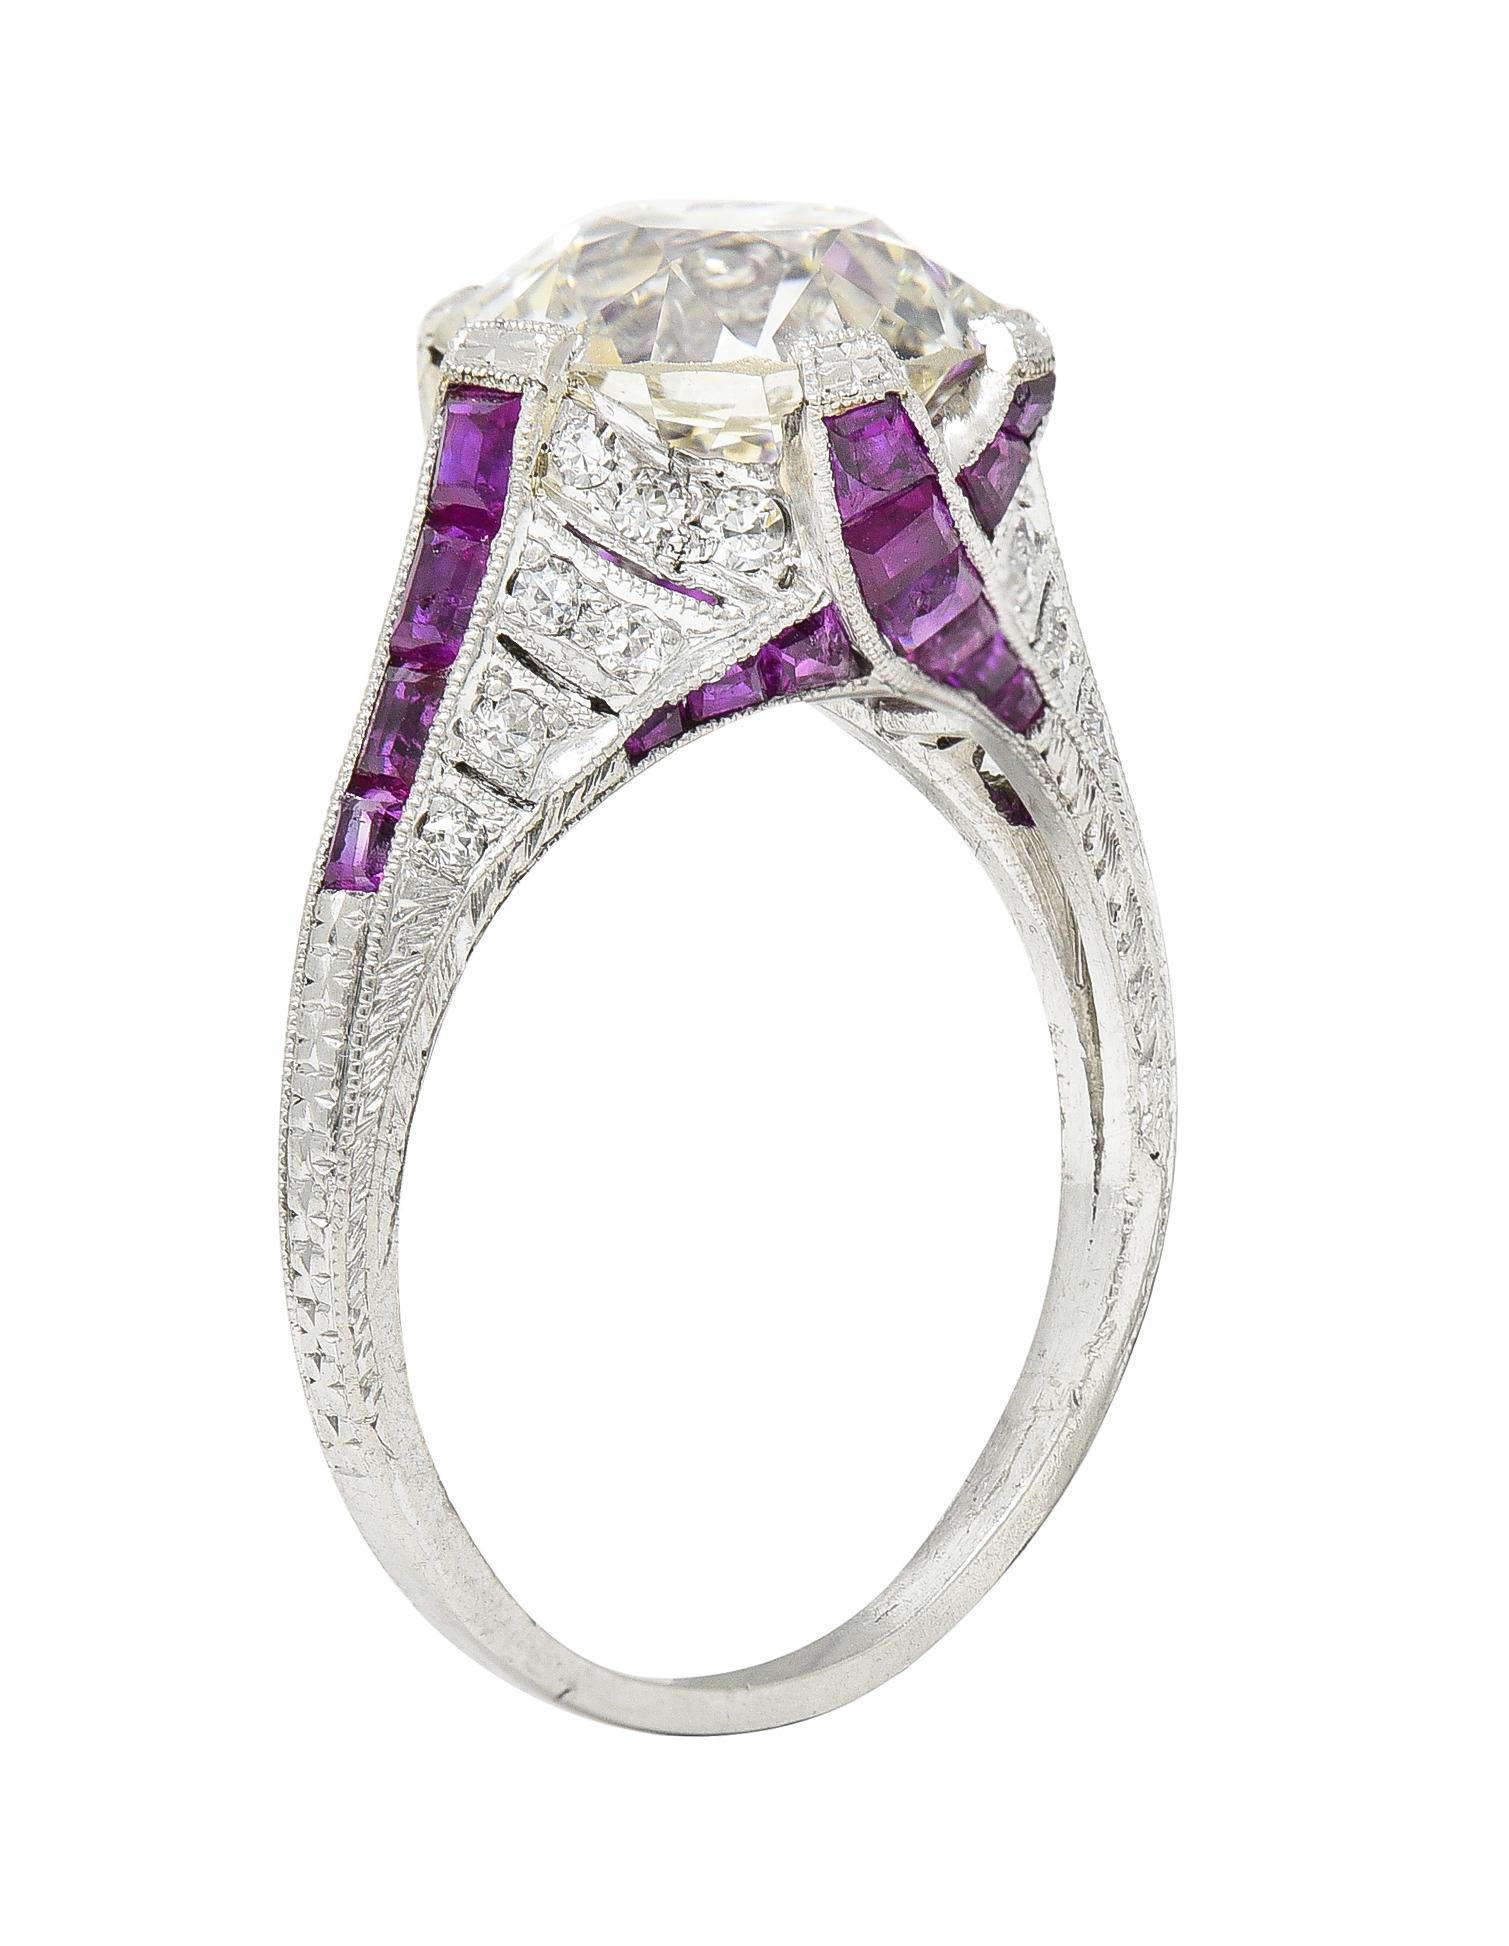 Centering an old European cut diamond weighing 3.75 carats - M color with VS2 clarity
Set with wide prongs and flanked by rows of calibré cut ruby shoulders and 'X' motif profile
Weighing approximately 2.20 carats total - transparent purplish red in